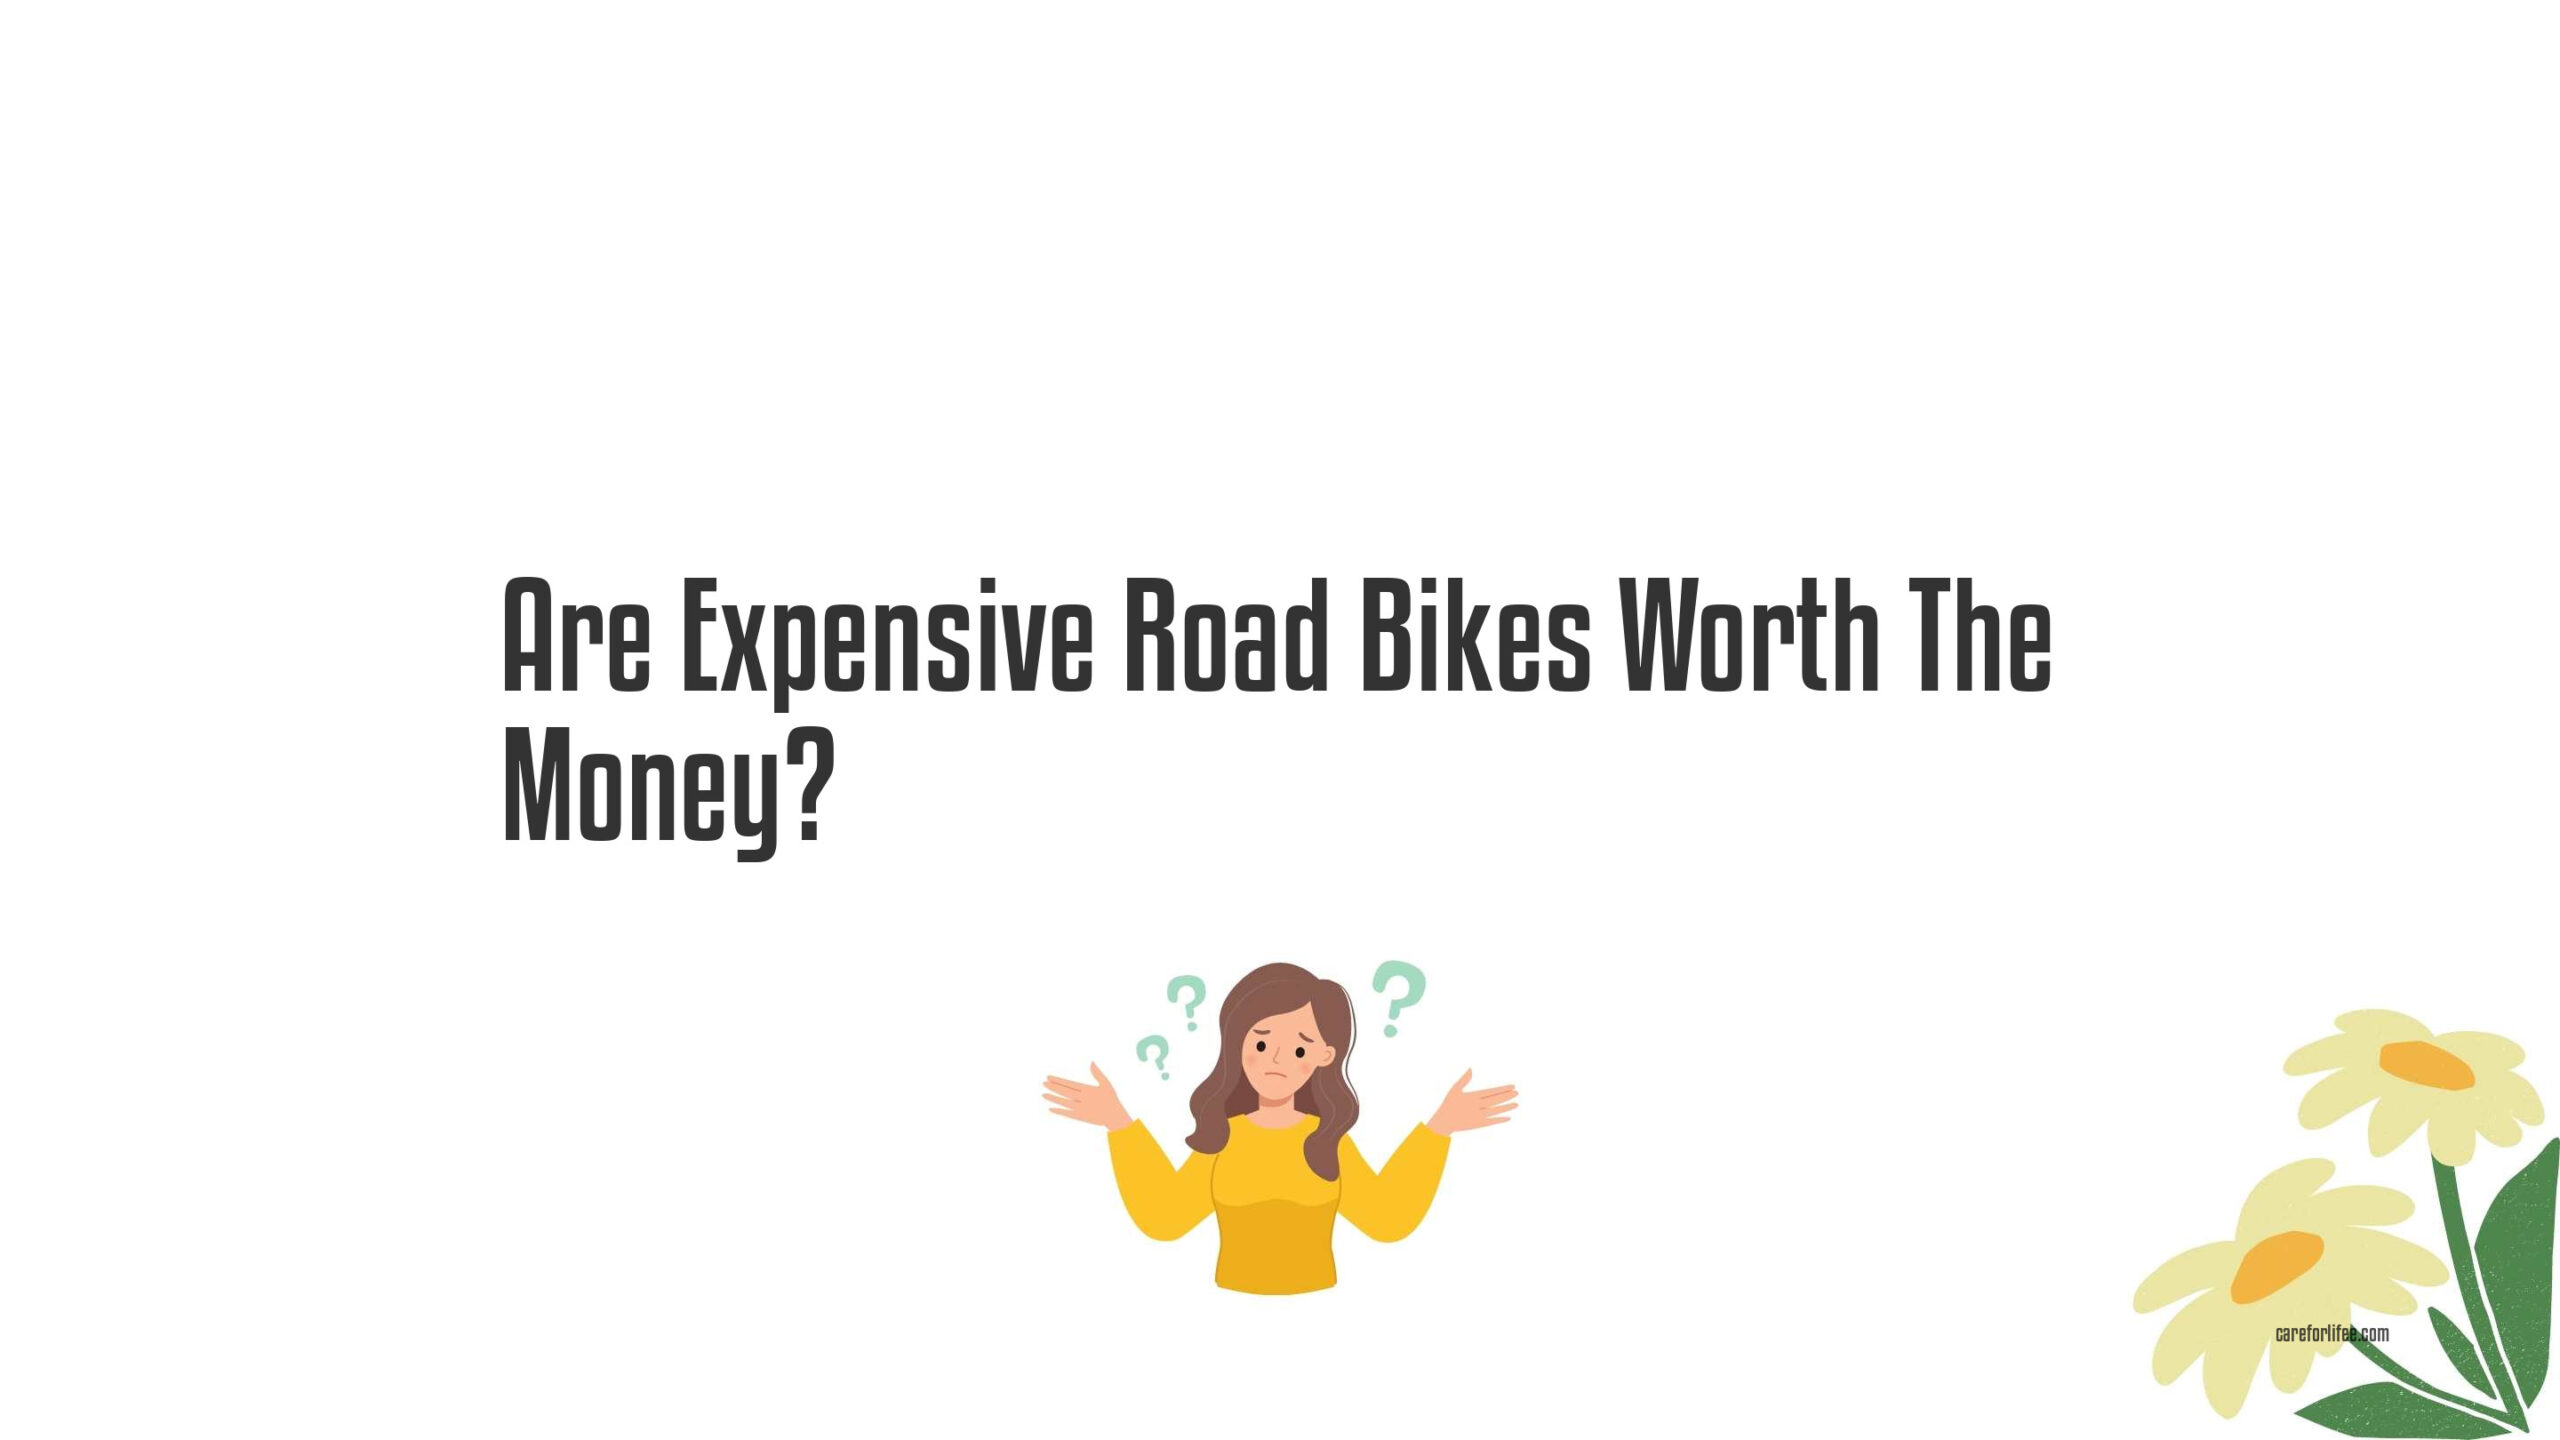 Are Expensive Road Bikes Worth The Money?